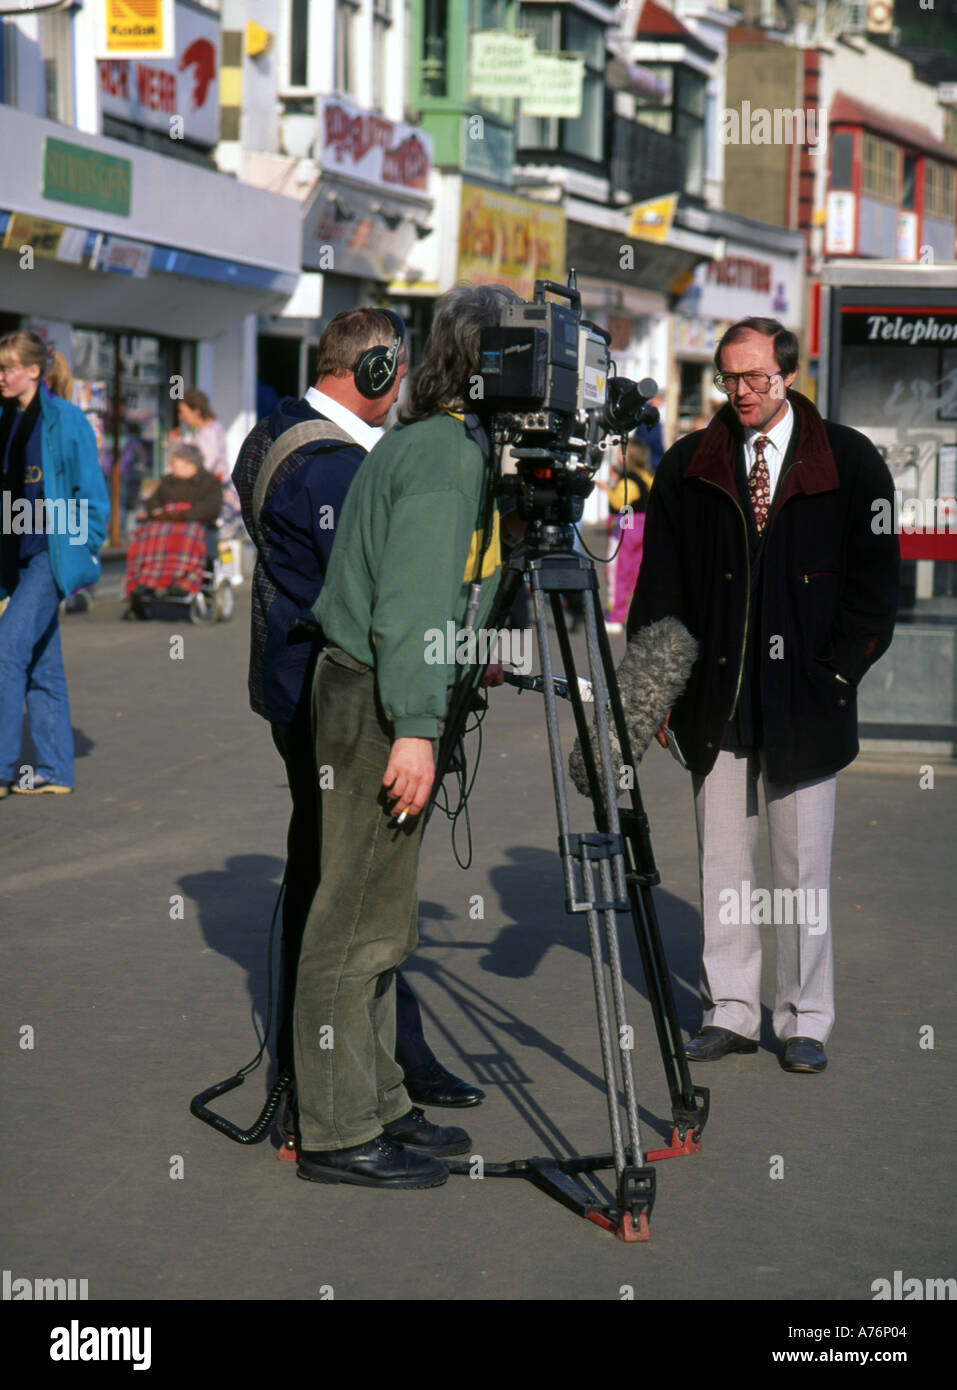 Television crew with presenter making a short clip to include in local television news Scarborough North Yorkshire England Stock Photo